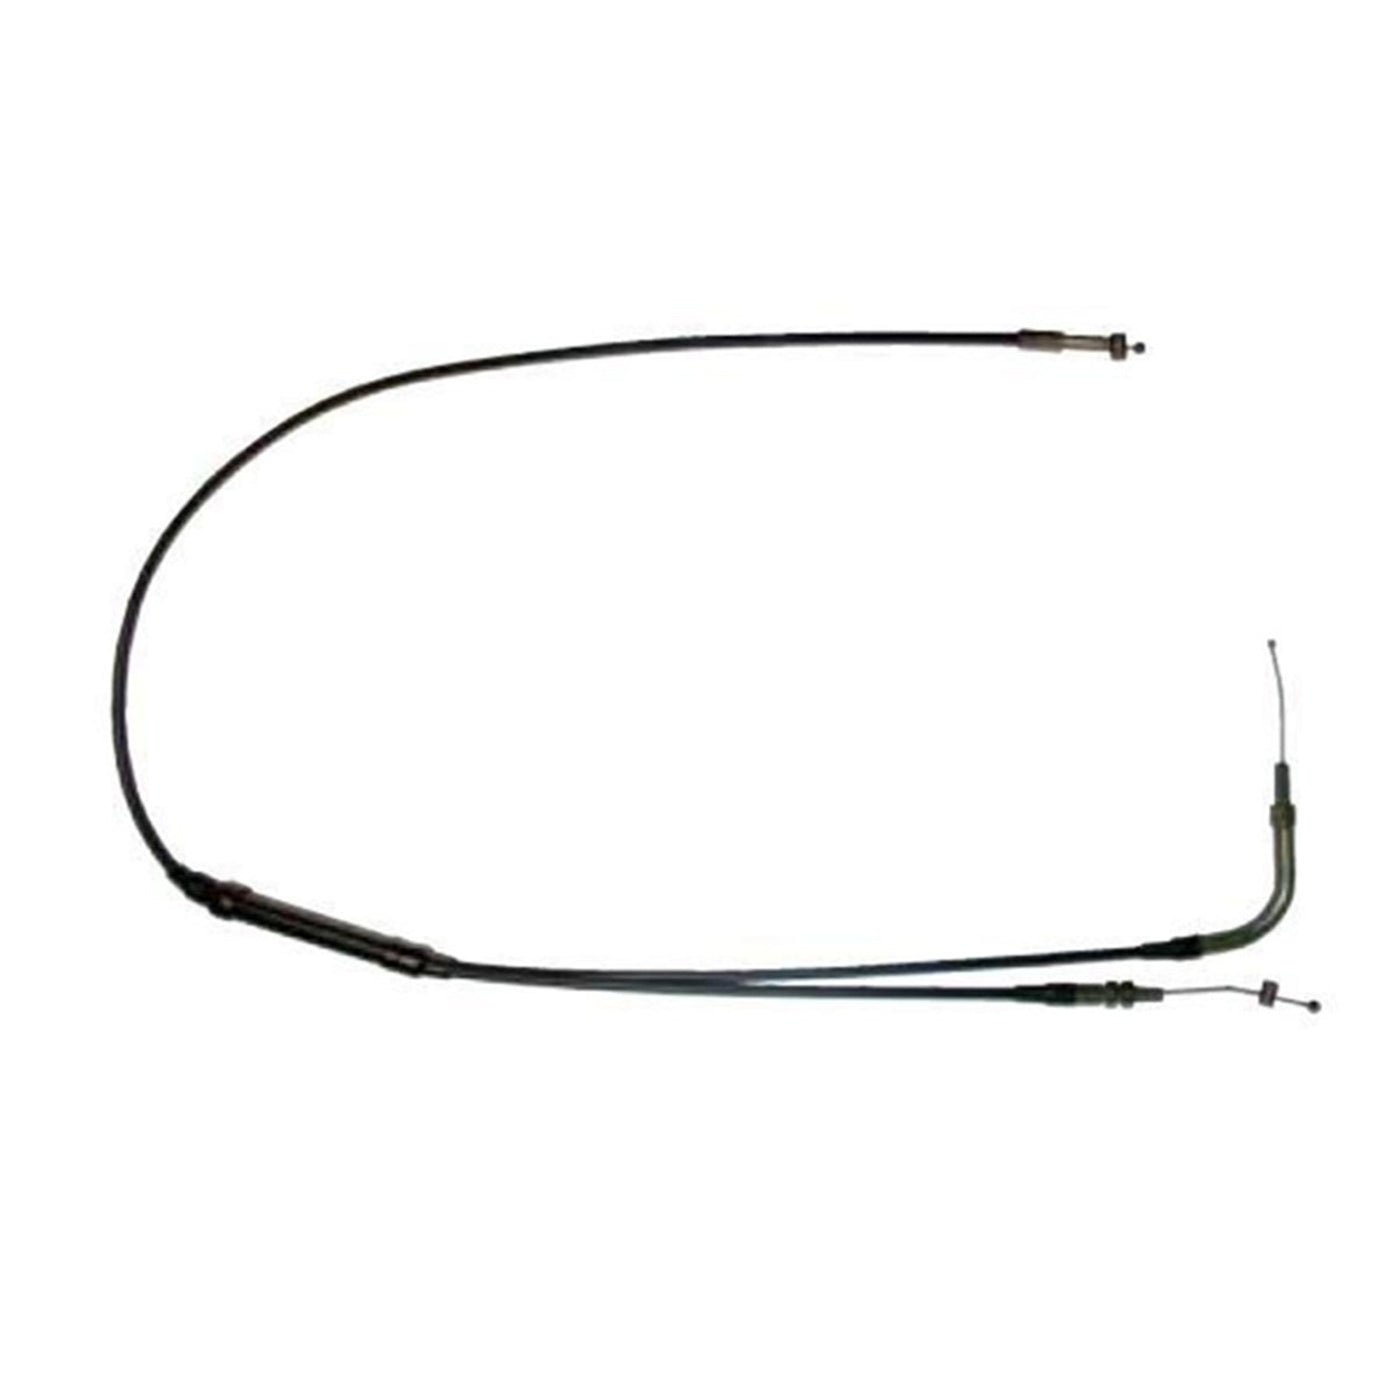 SPI 05-140-20 Throttle Cable #05-140-20